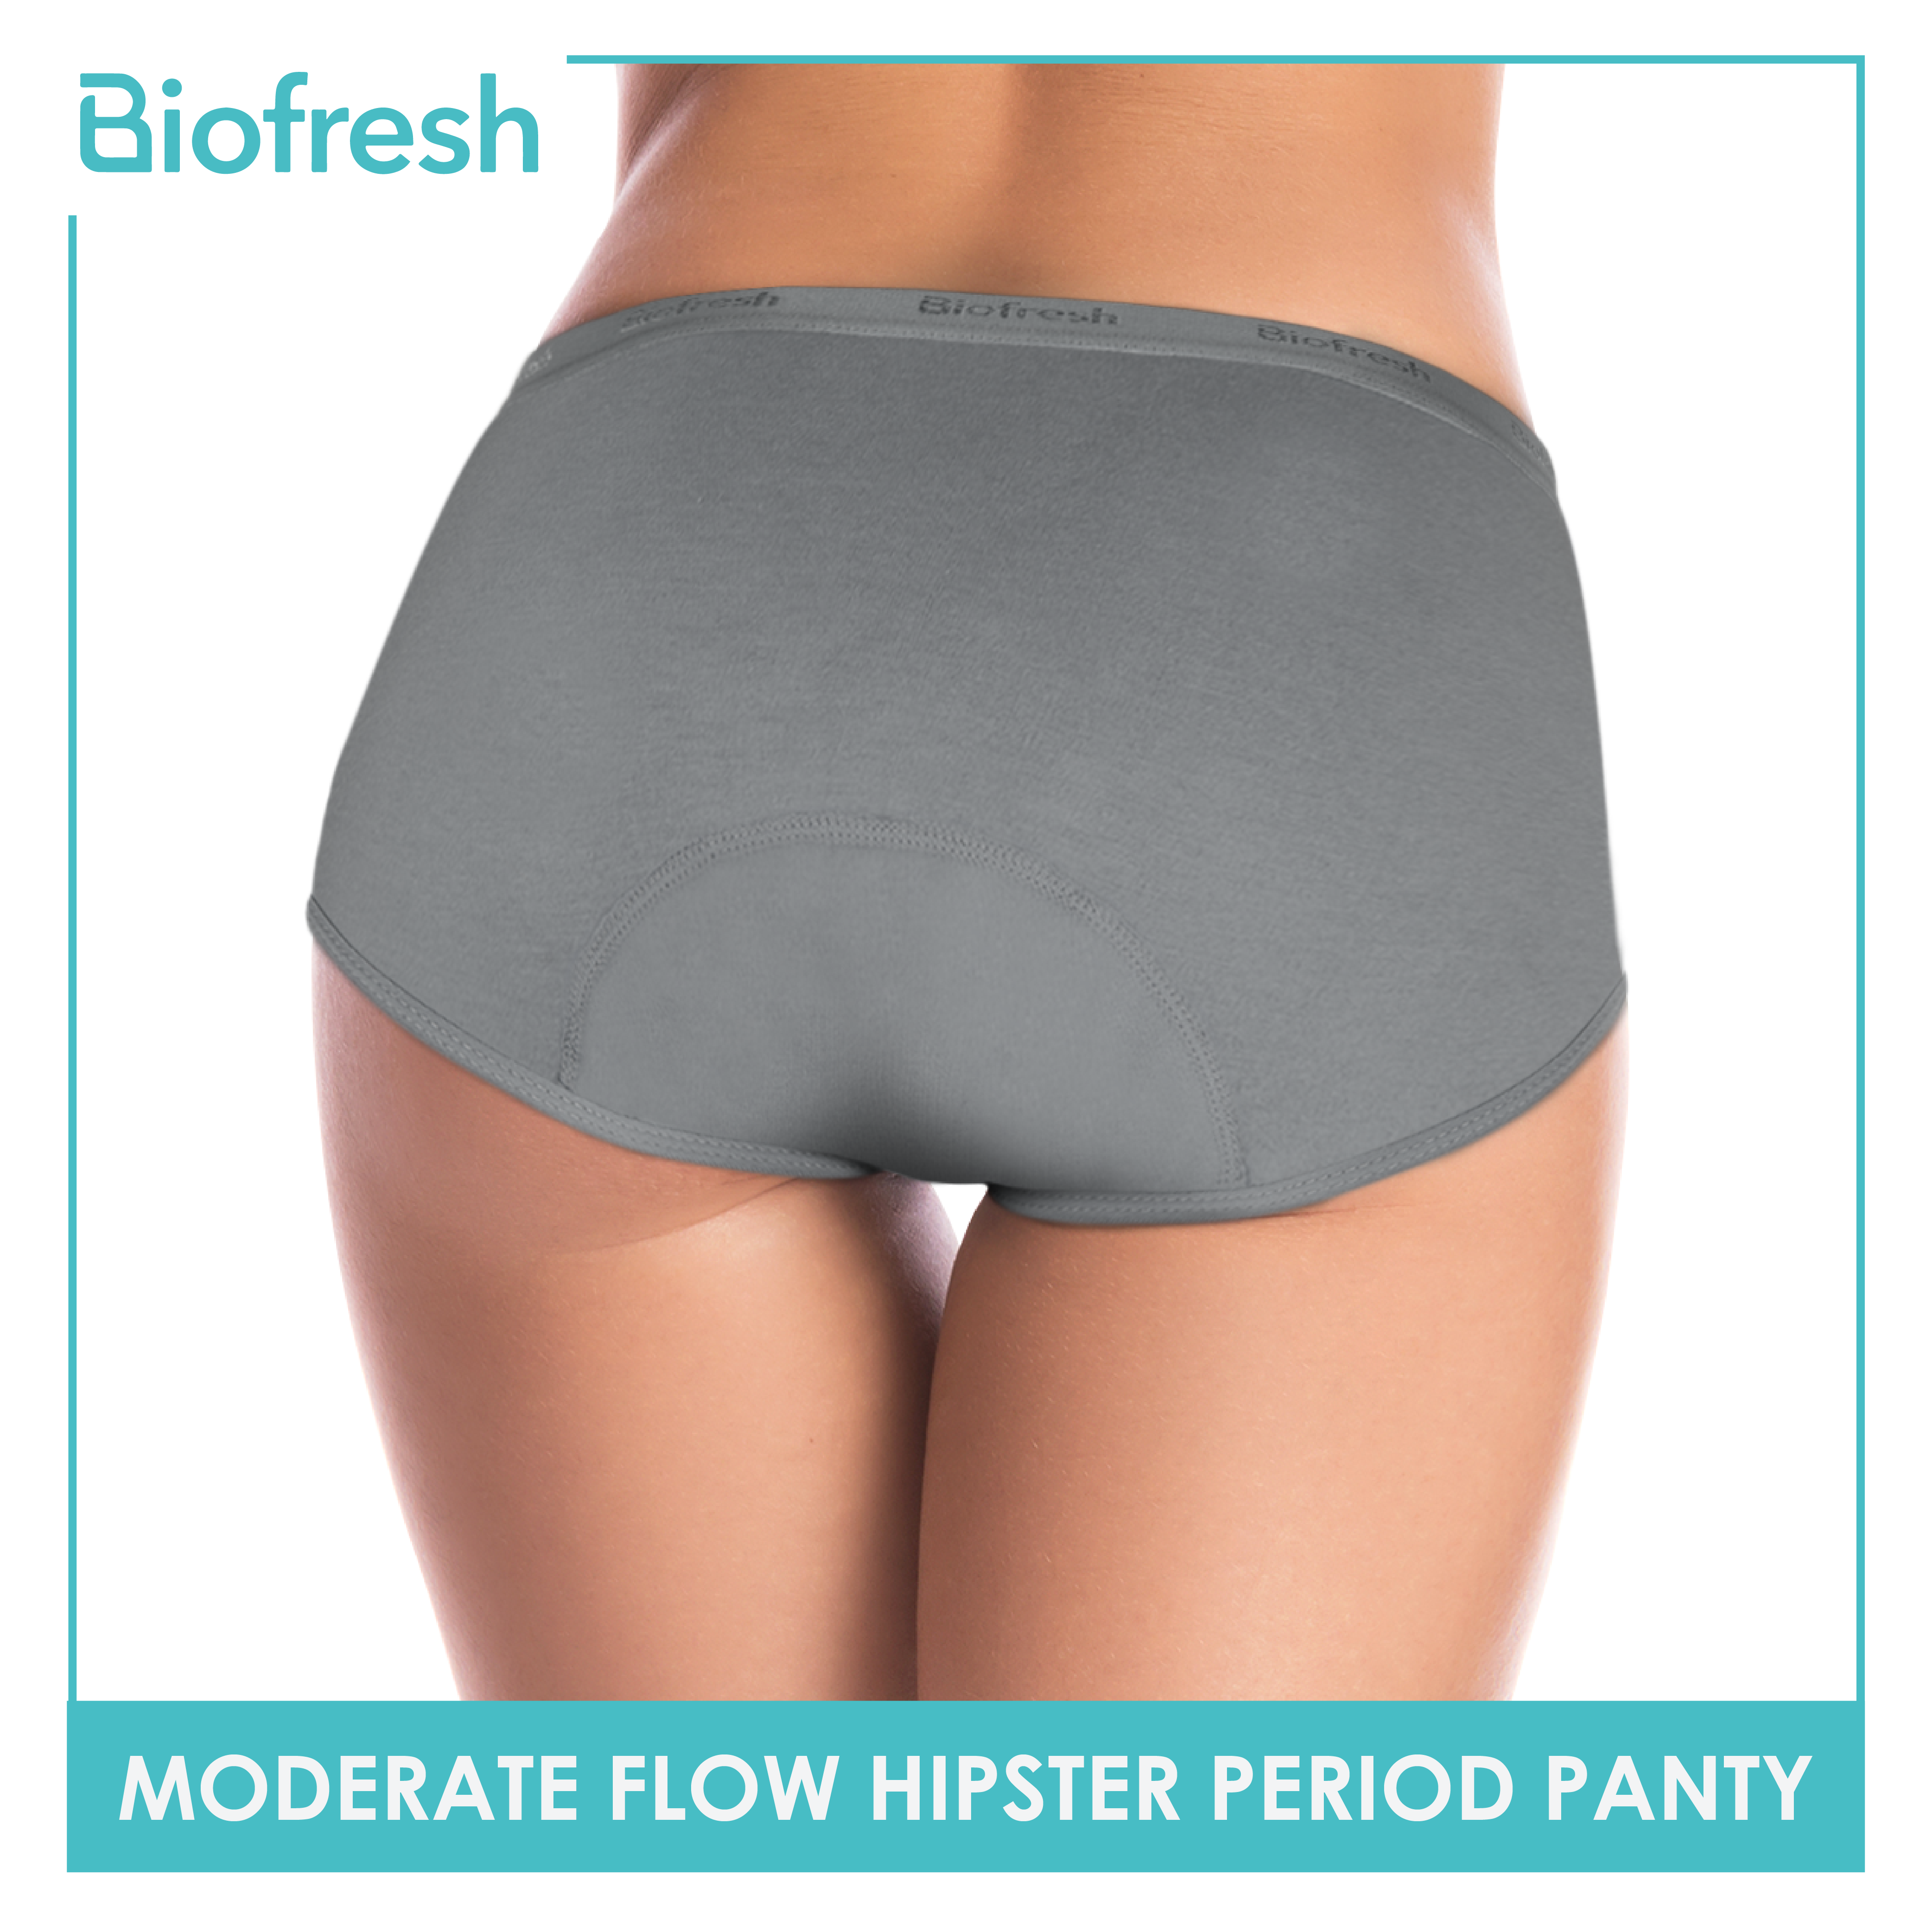 Buy Biofresh Ladies' Antimicrobial Modal Cotton Full Panty 3 Pieces In A  Pack Ulprg1101 2024 Online